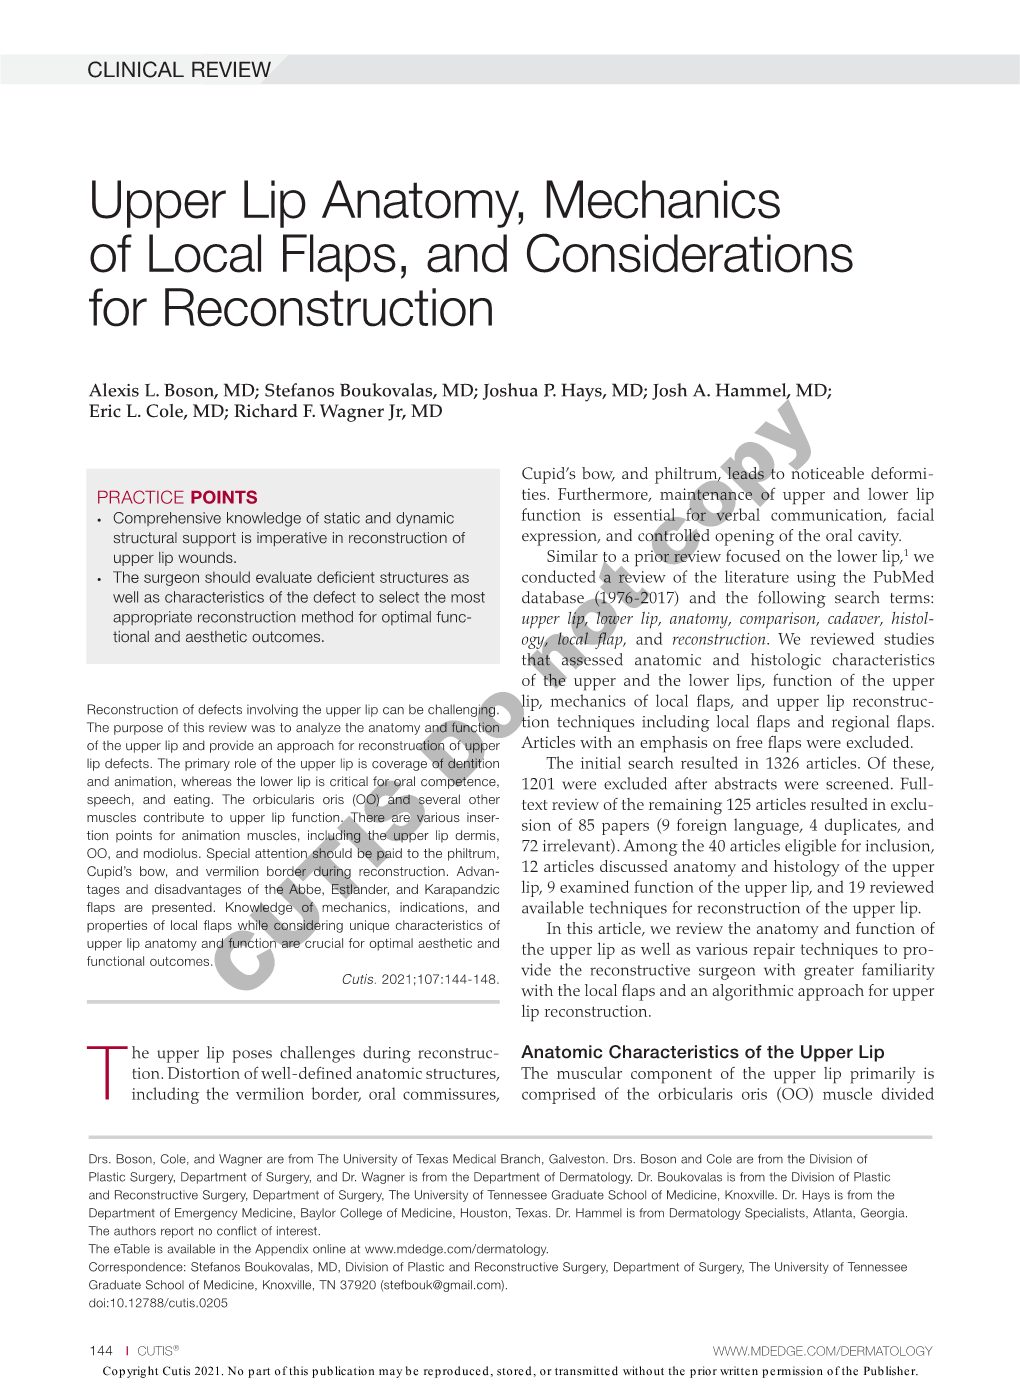 Upper Lip Anatomy, Mechanics of Local Flaps, and Considerations for Reconstruction